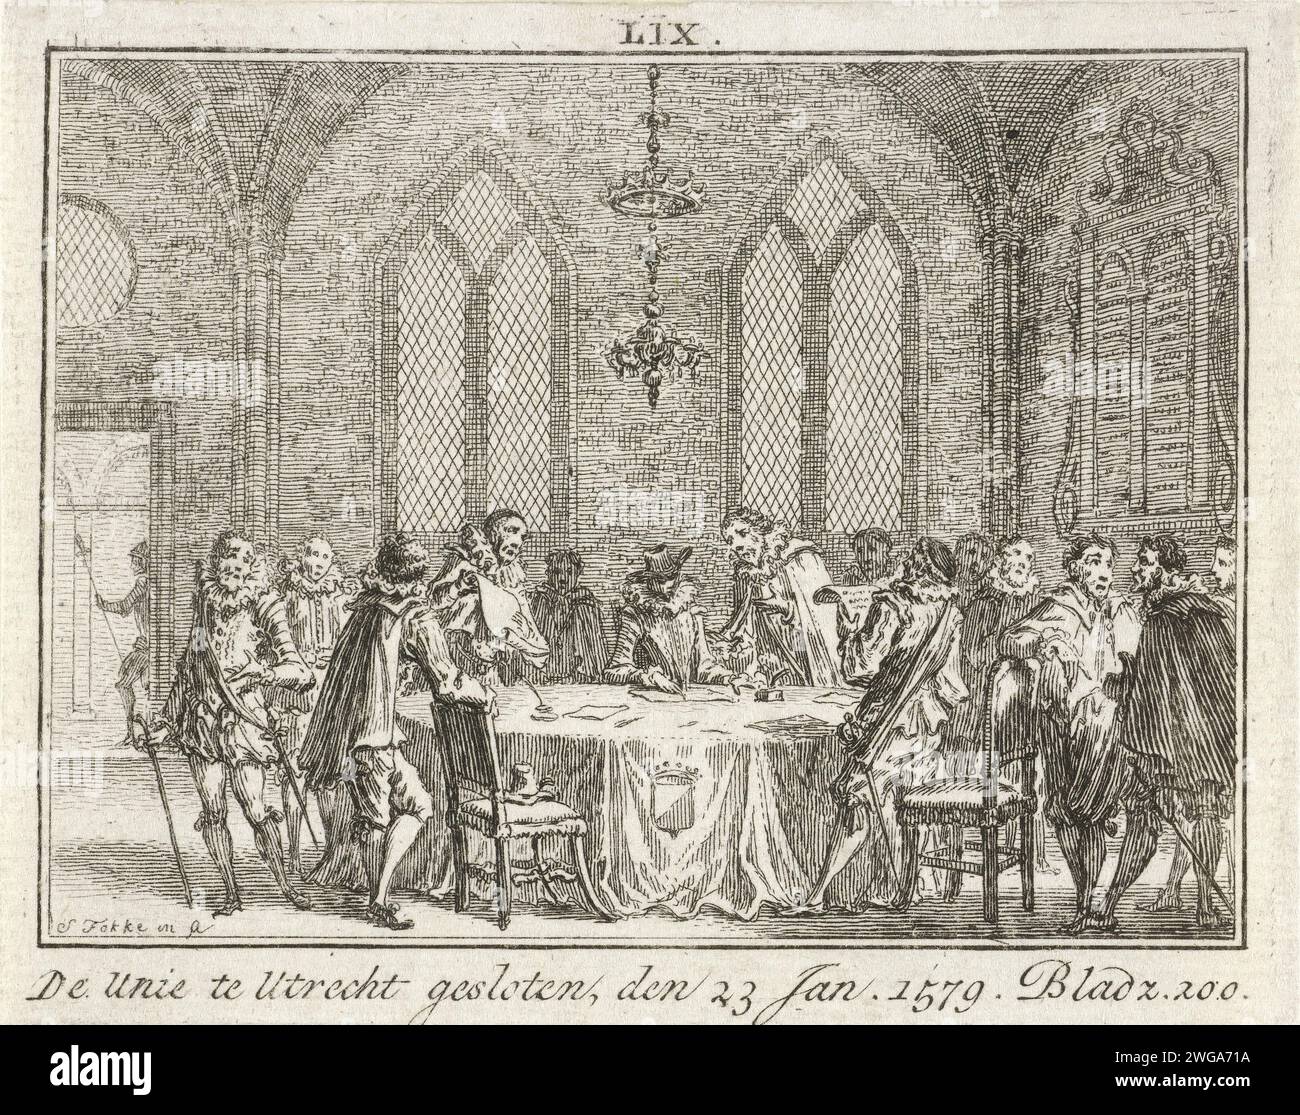 Closing the Union of Utrecht, 1579, 1782 - 1784 print Closing the Union of Utrecht. View of interior with a group of men around a table, January 23, 1579. Northern Netherlands paper etching alliance, league, union, foedus Stock Photo